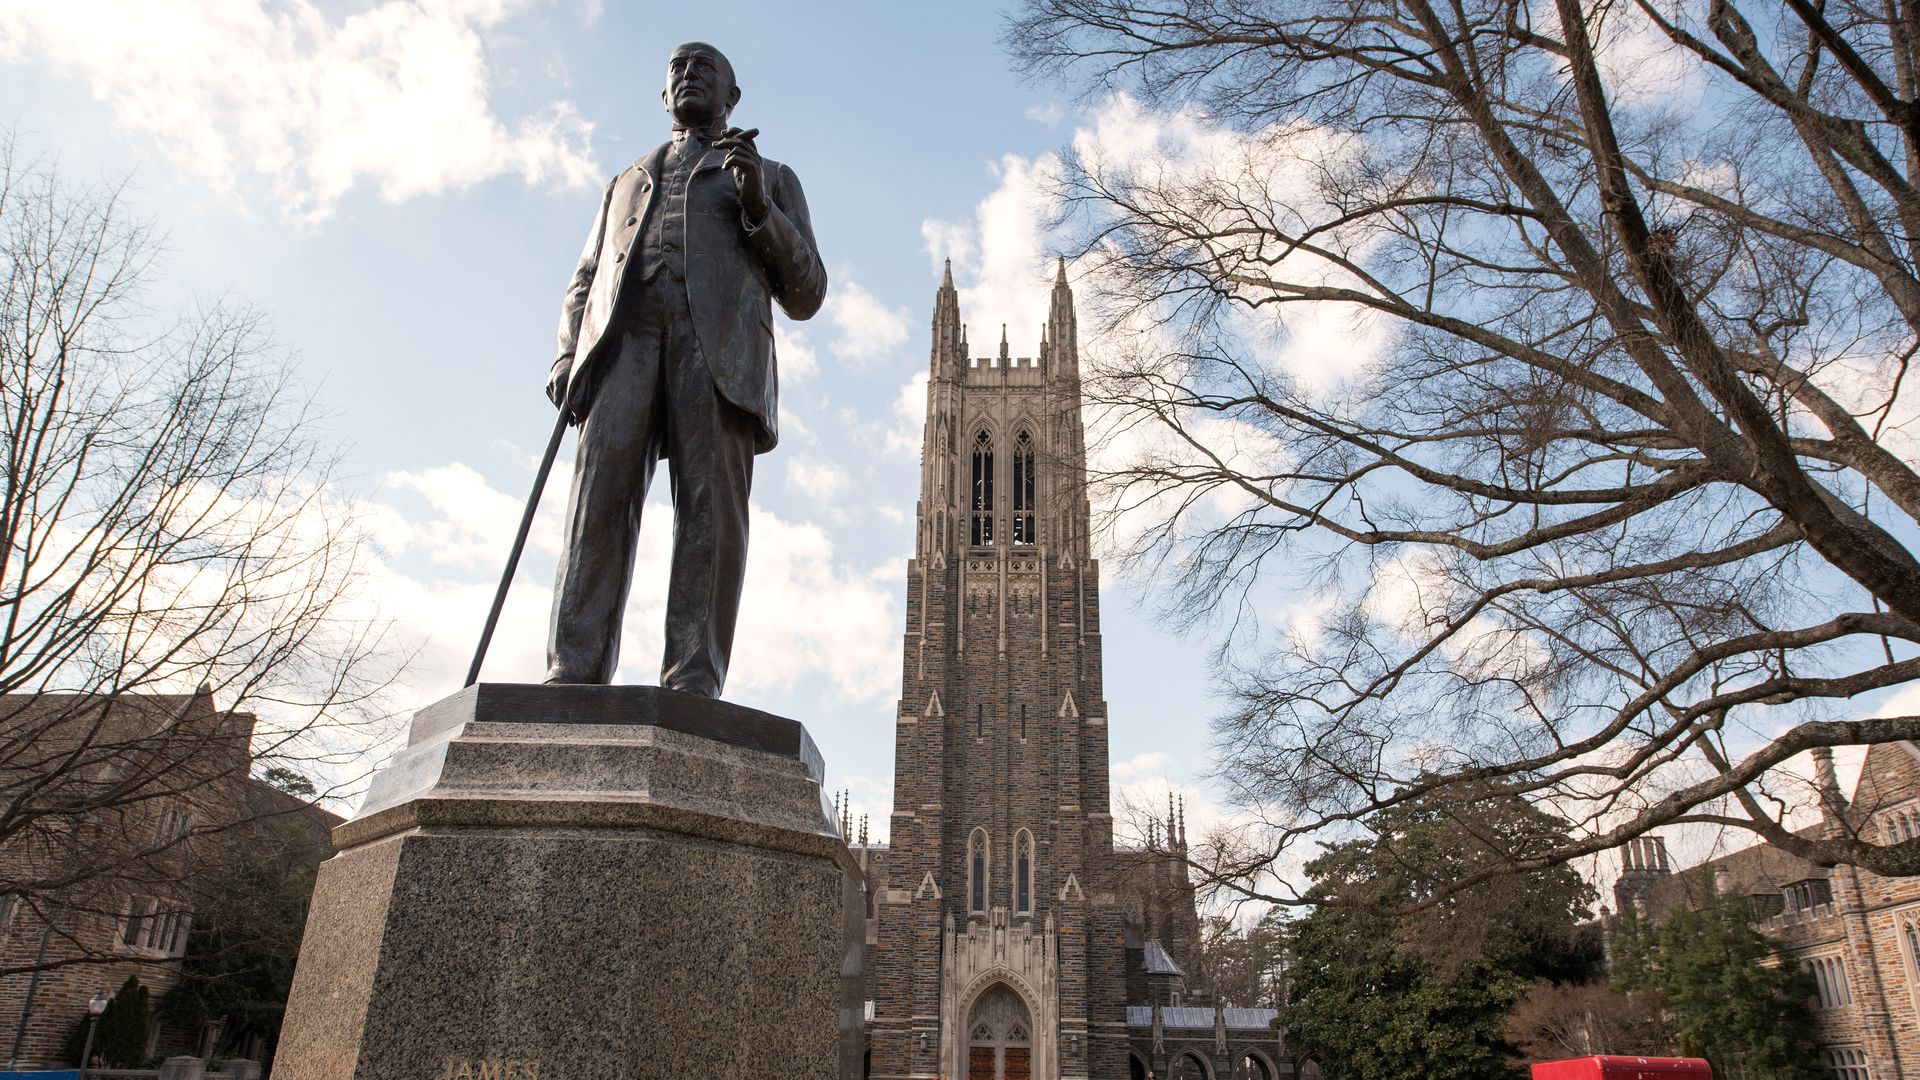 Duke statue before chapel on campus.